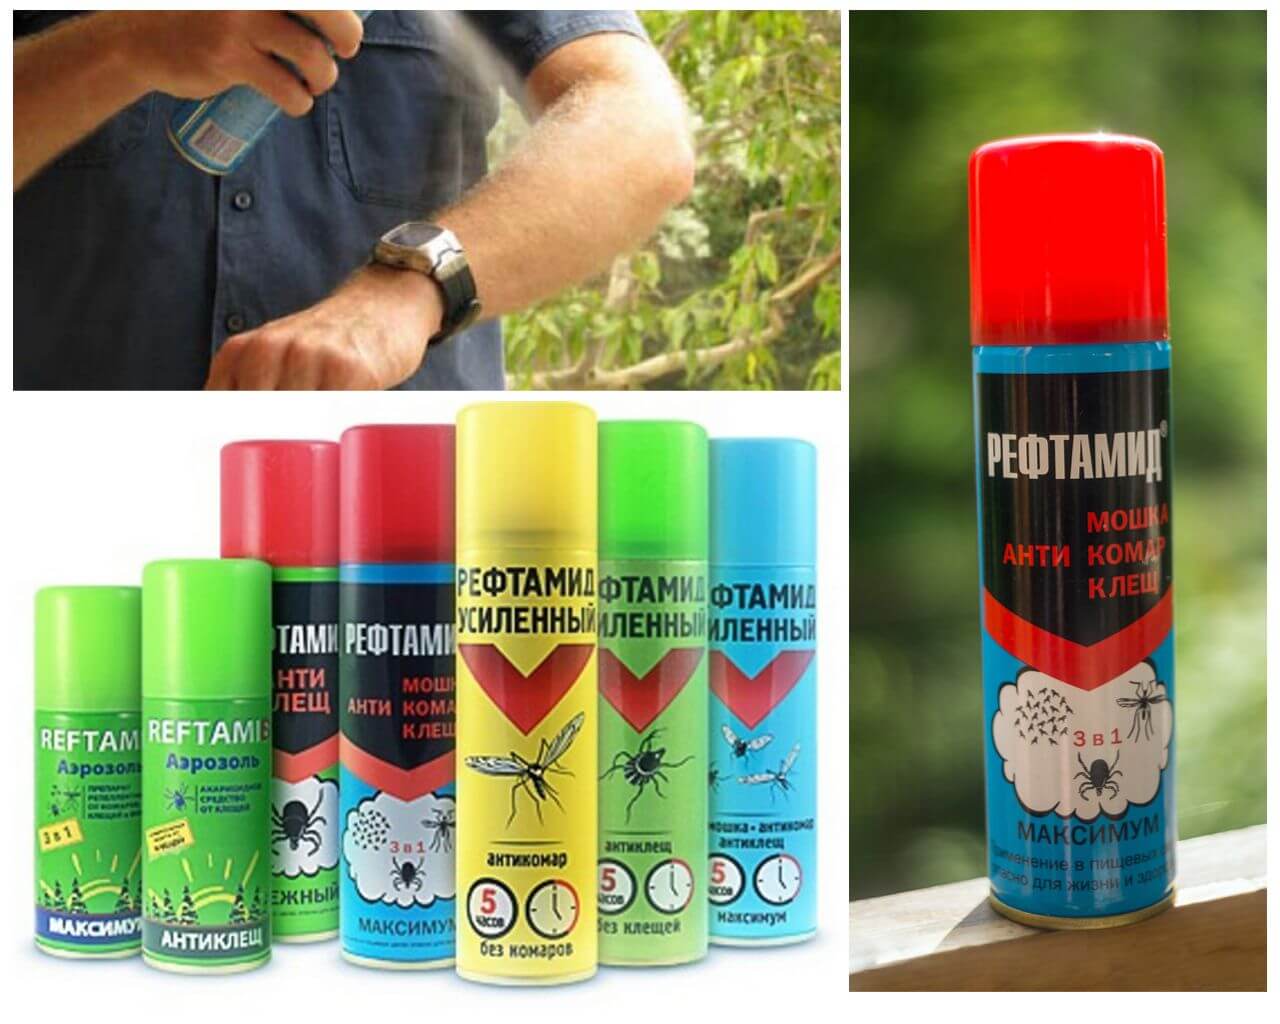 Reftamide spray from mosquitoes